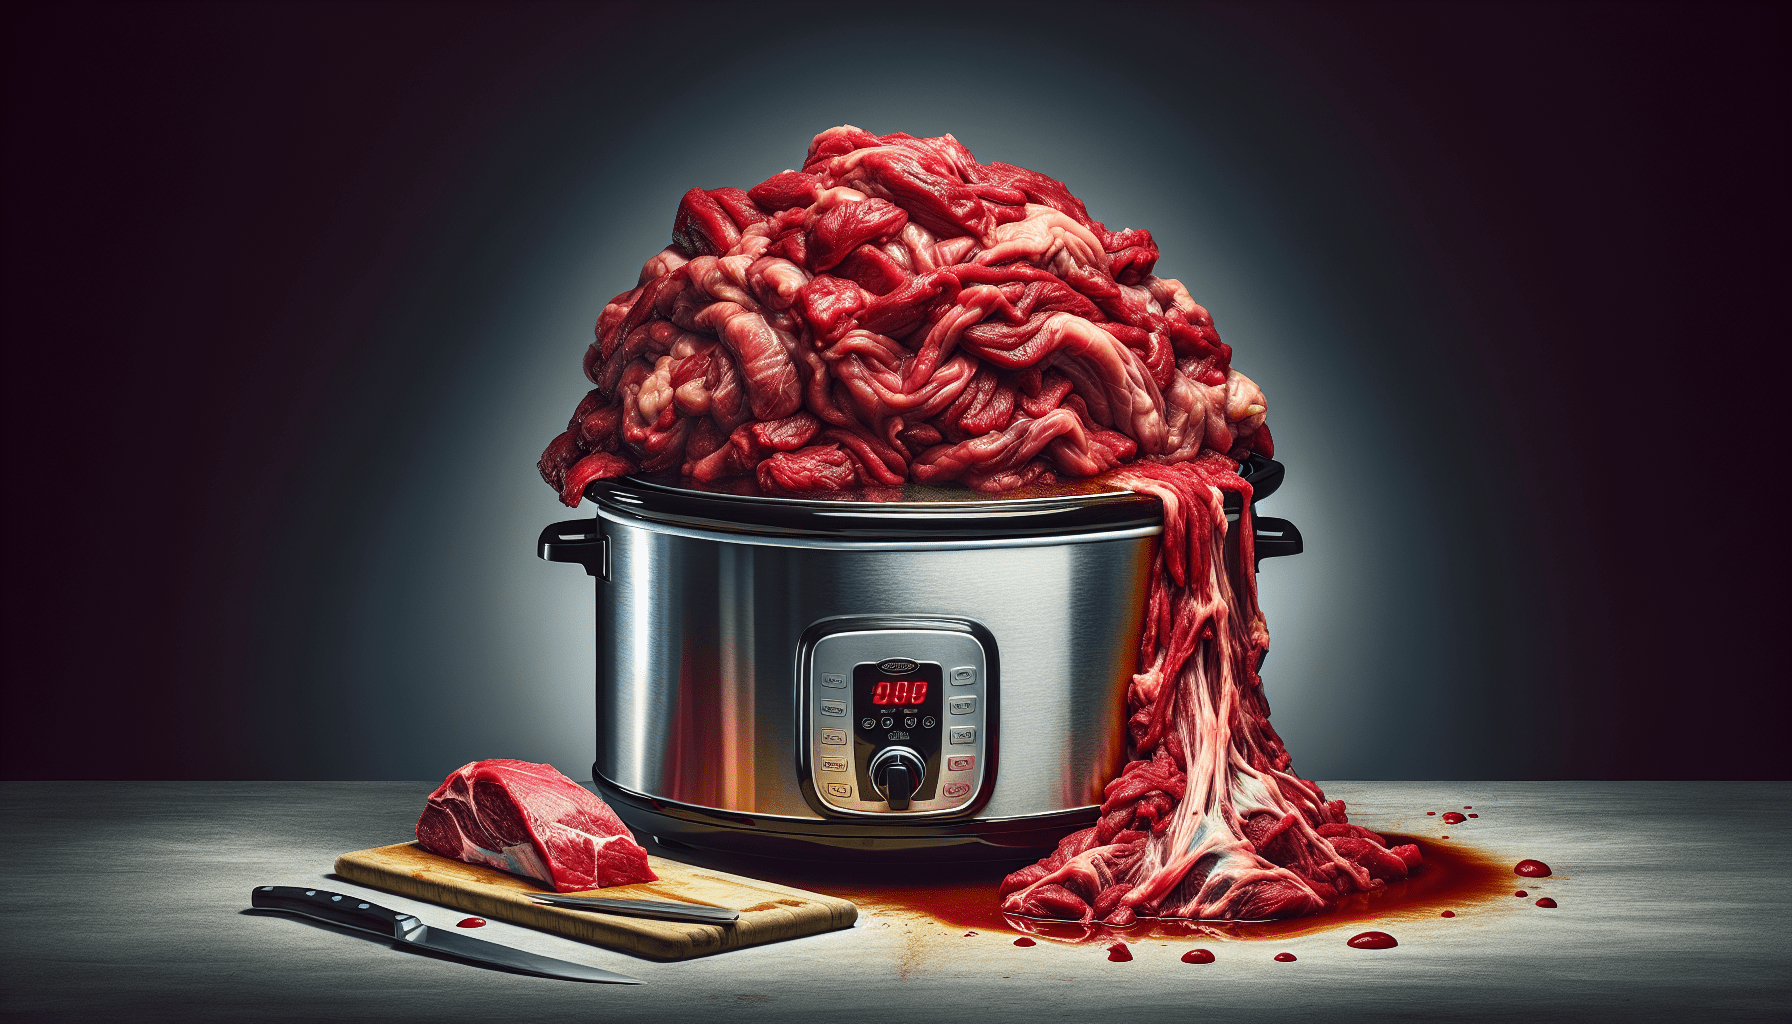 Why Can’t You Put Raw Meat In A Slow Cooker?